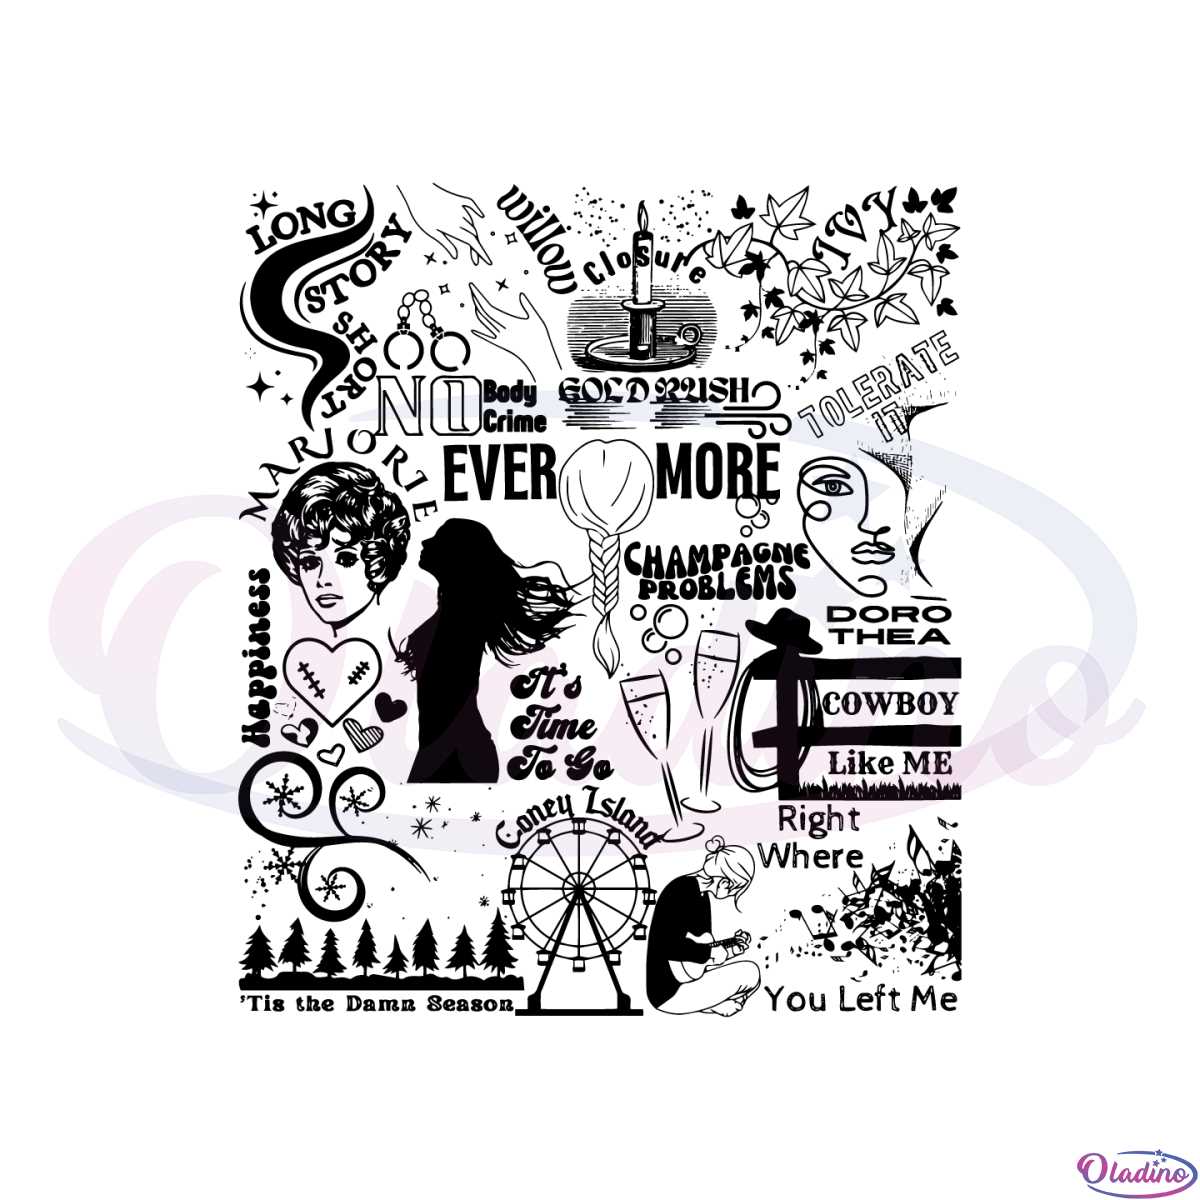 evermore-track-list-taylor-swift-song-svg-graphic-designs-files